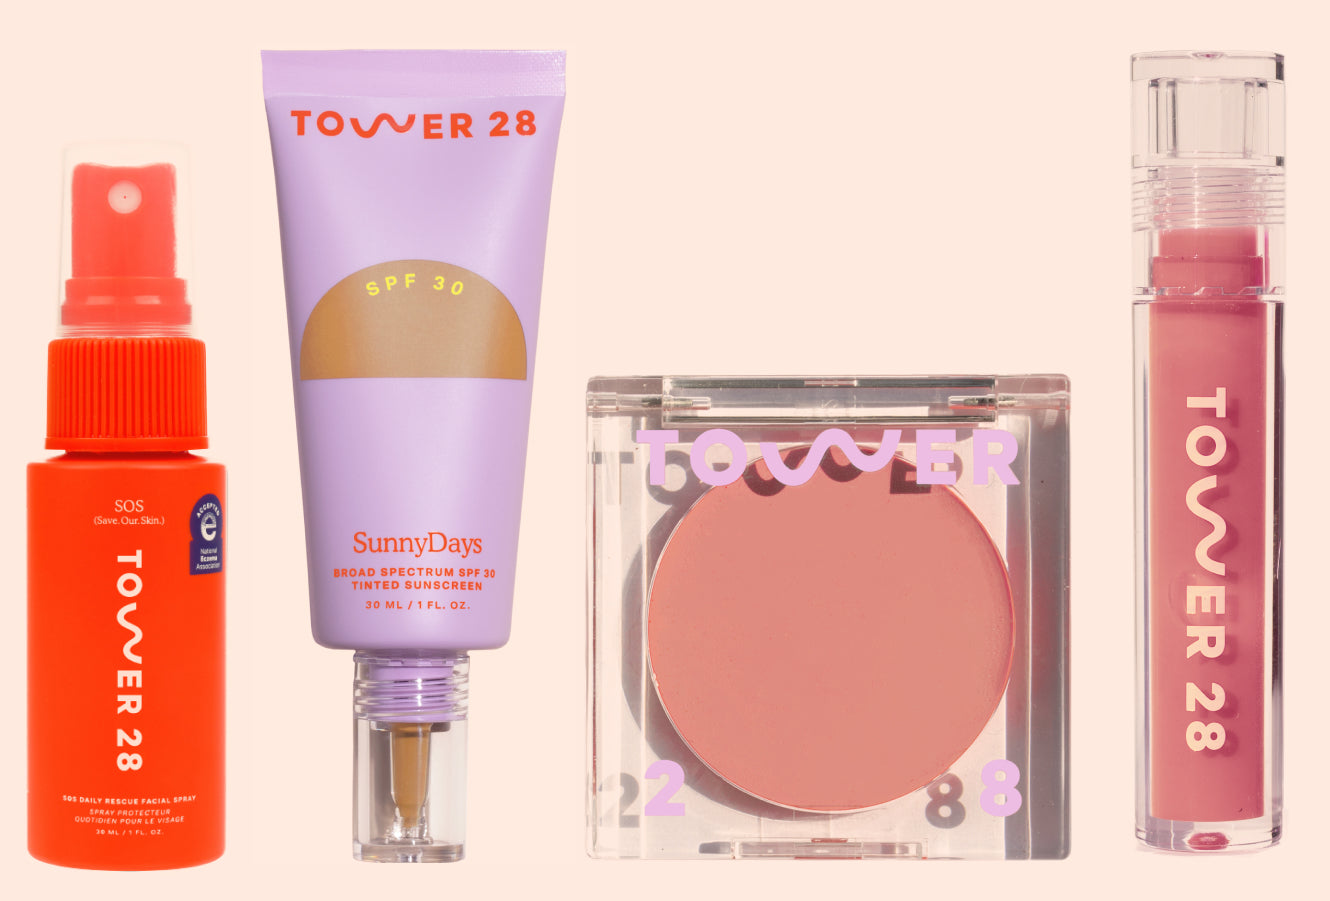 How Amy Liu Is Modernizing the Beauty Industry Through Her Brand, Tower 28